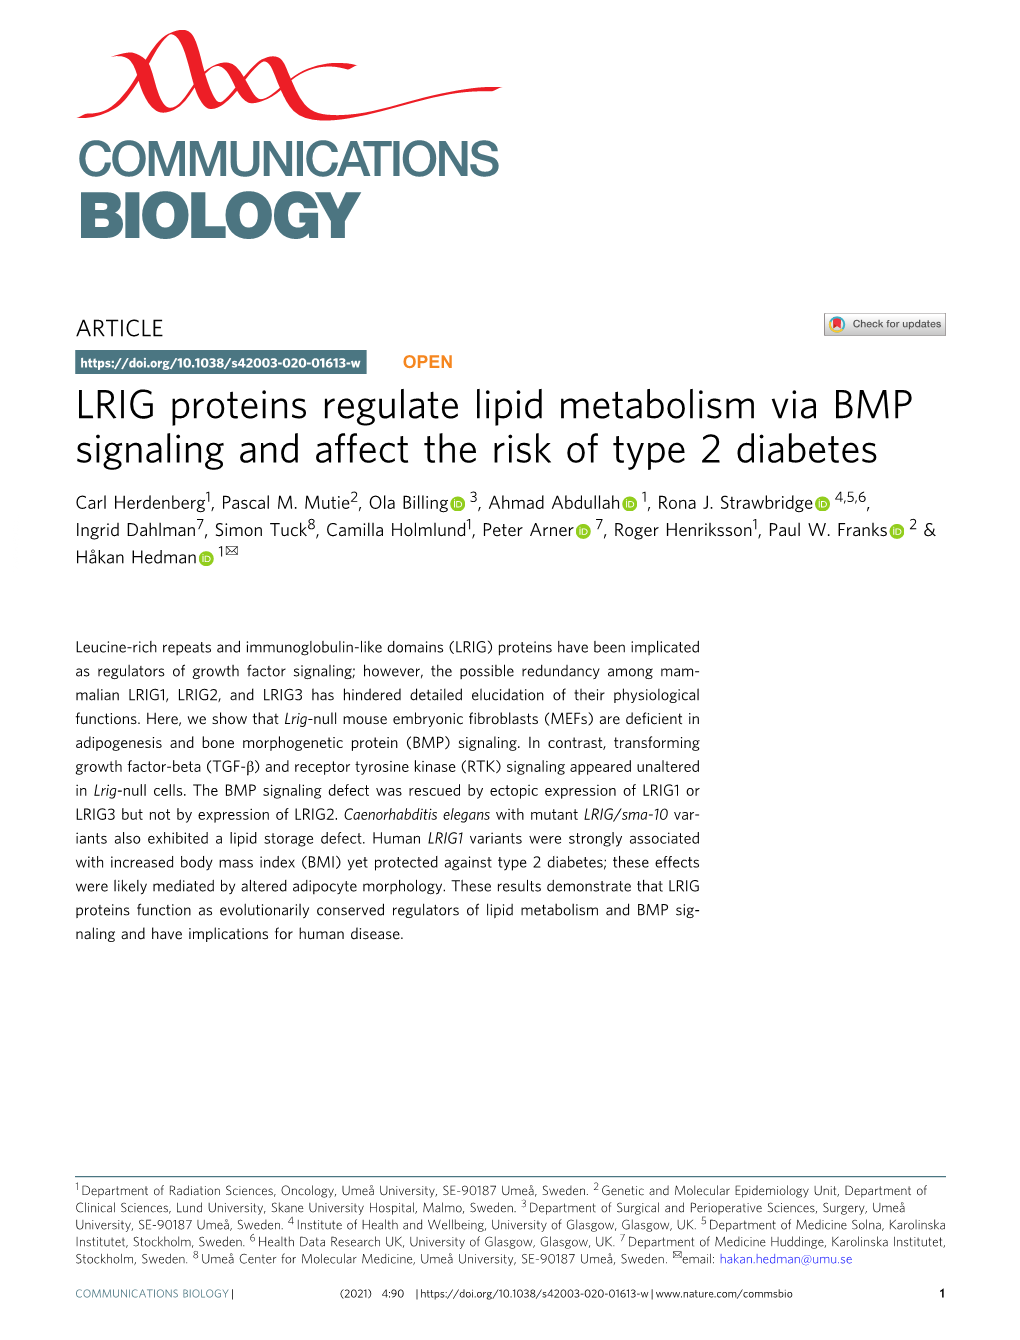 LRIG Proteins Regulate Lipid Metabolism Via BMP Signaling and Affect the Risk of Type 2 Diabetes